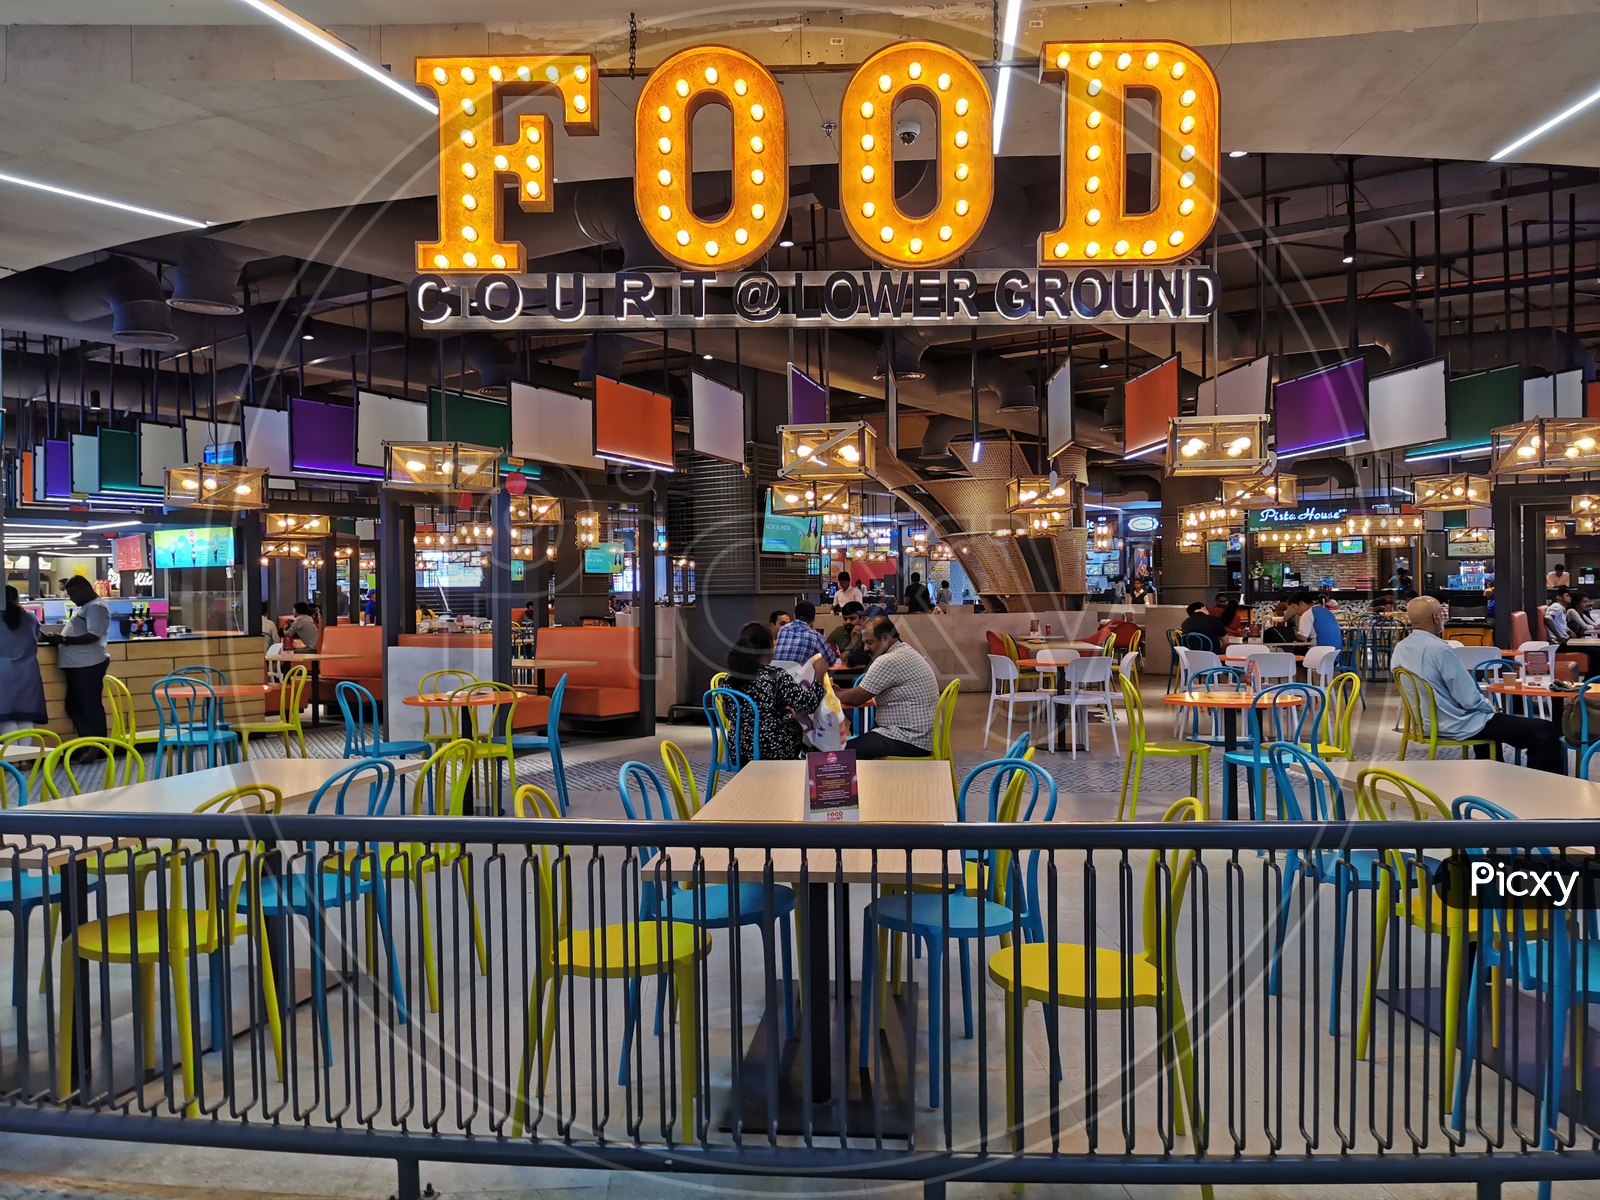 Food Court   Led Board  in a Mall